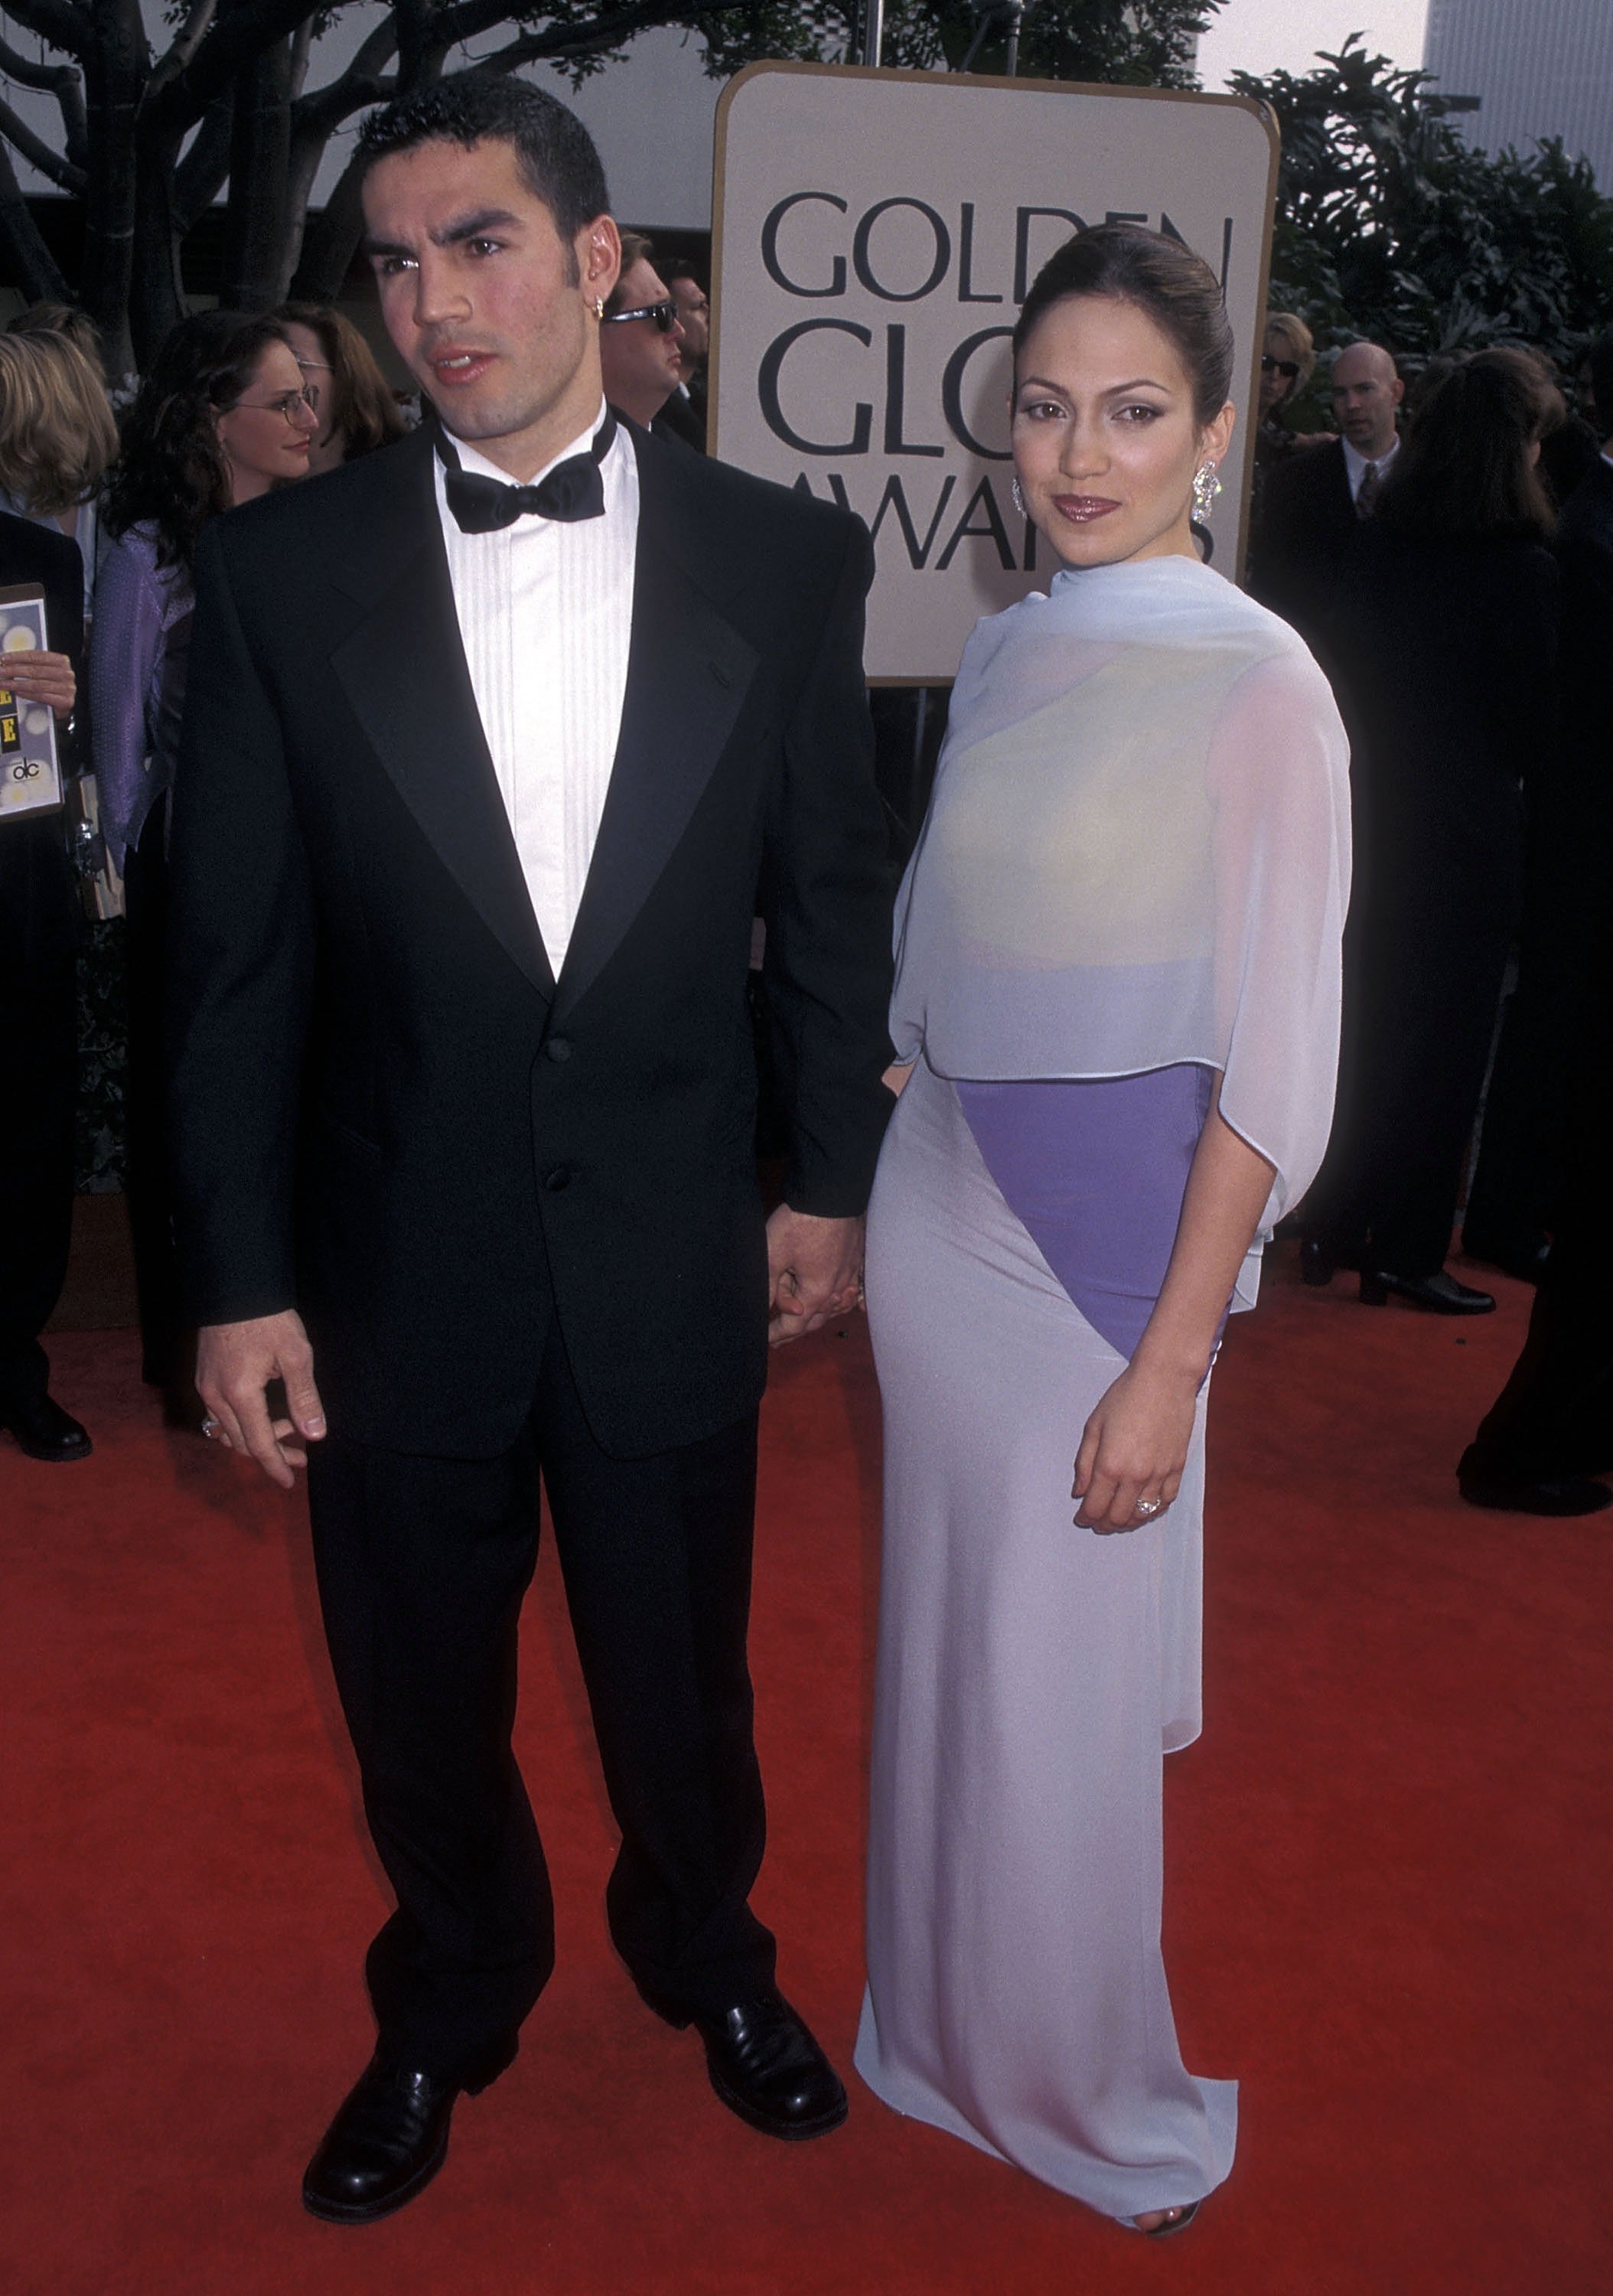 Jennifer Lopez and Ojani Noa attending the 55th Annual Golden Globe Awards on January 18, 1998 at Beverly Hilton Hotel in Beverly Hills, California. | Source: Getty Images